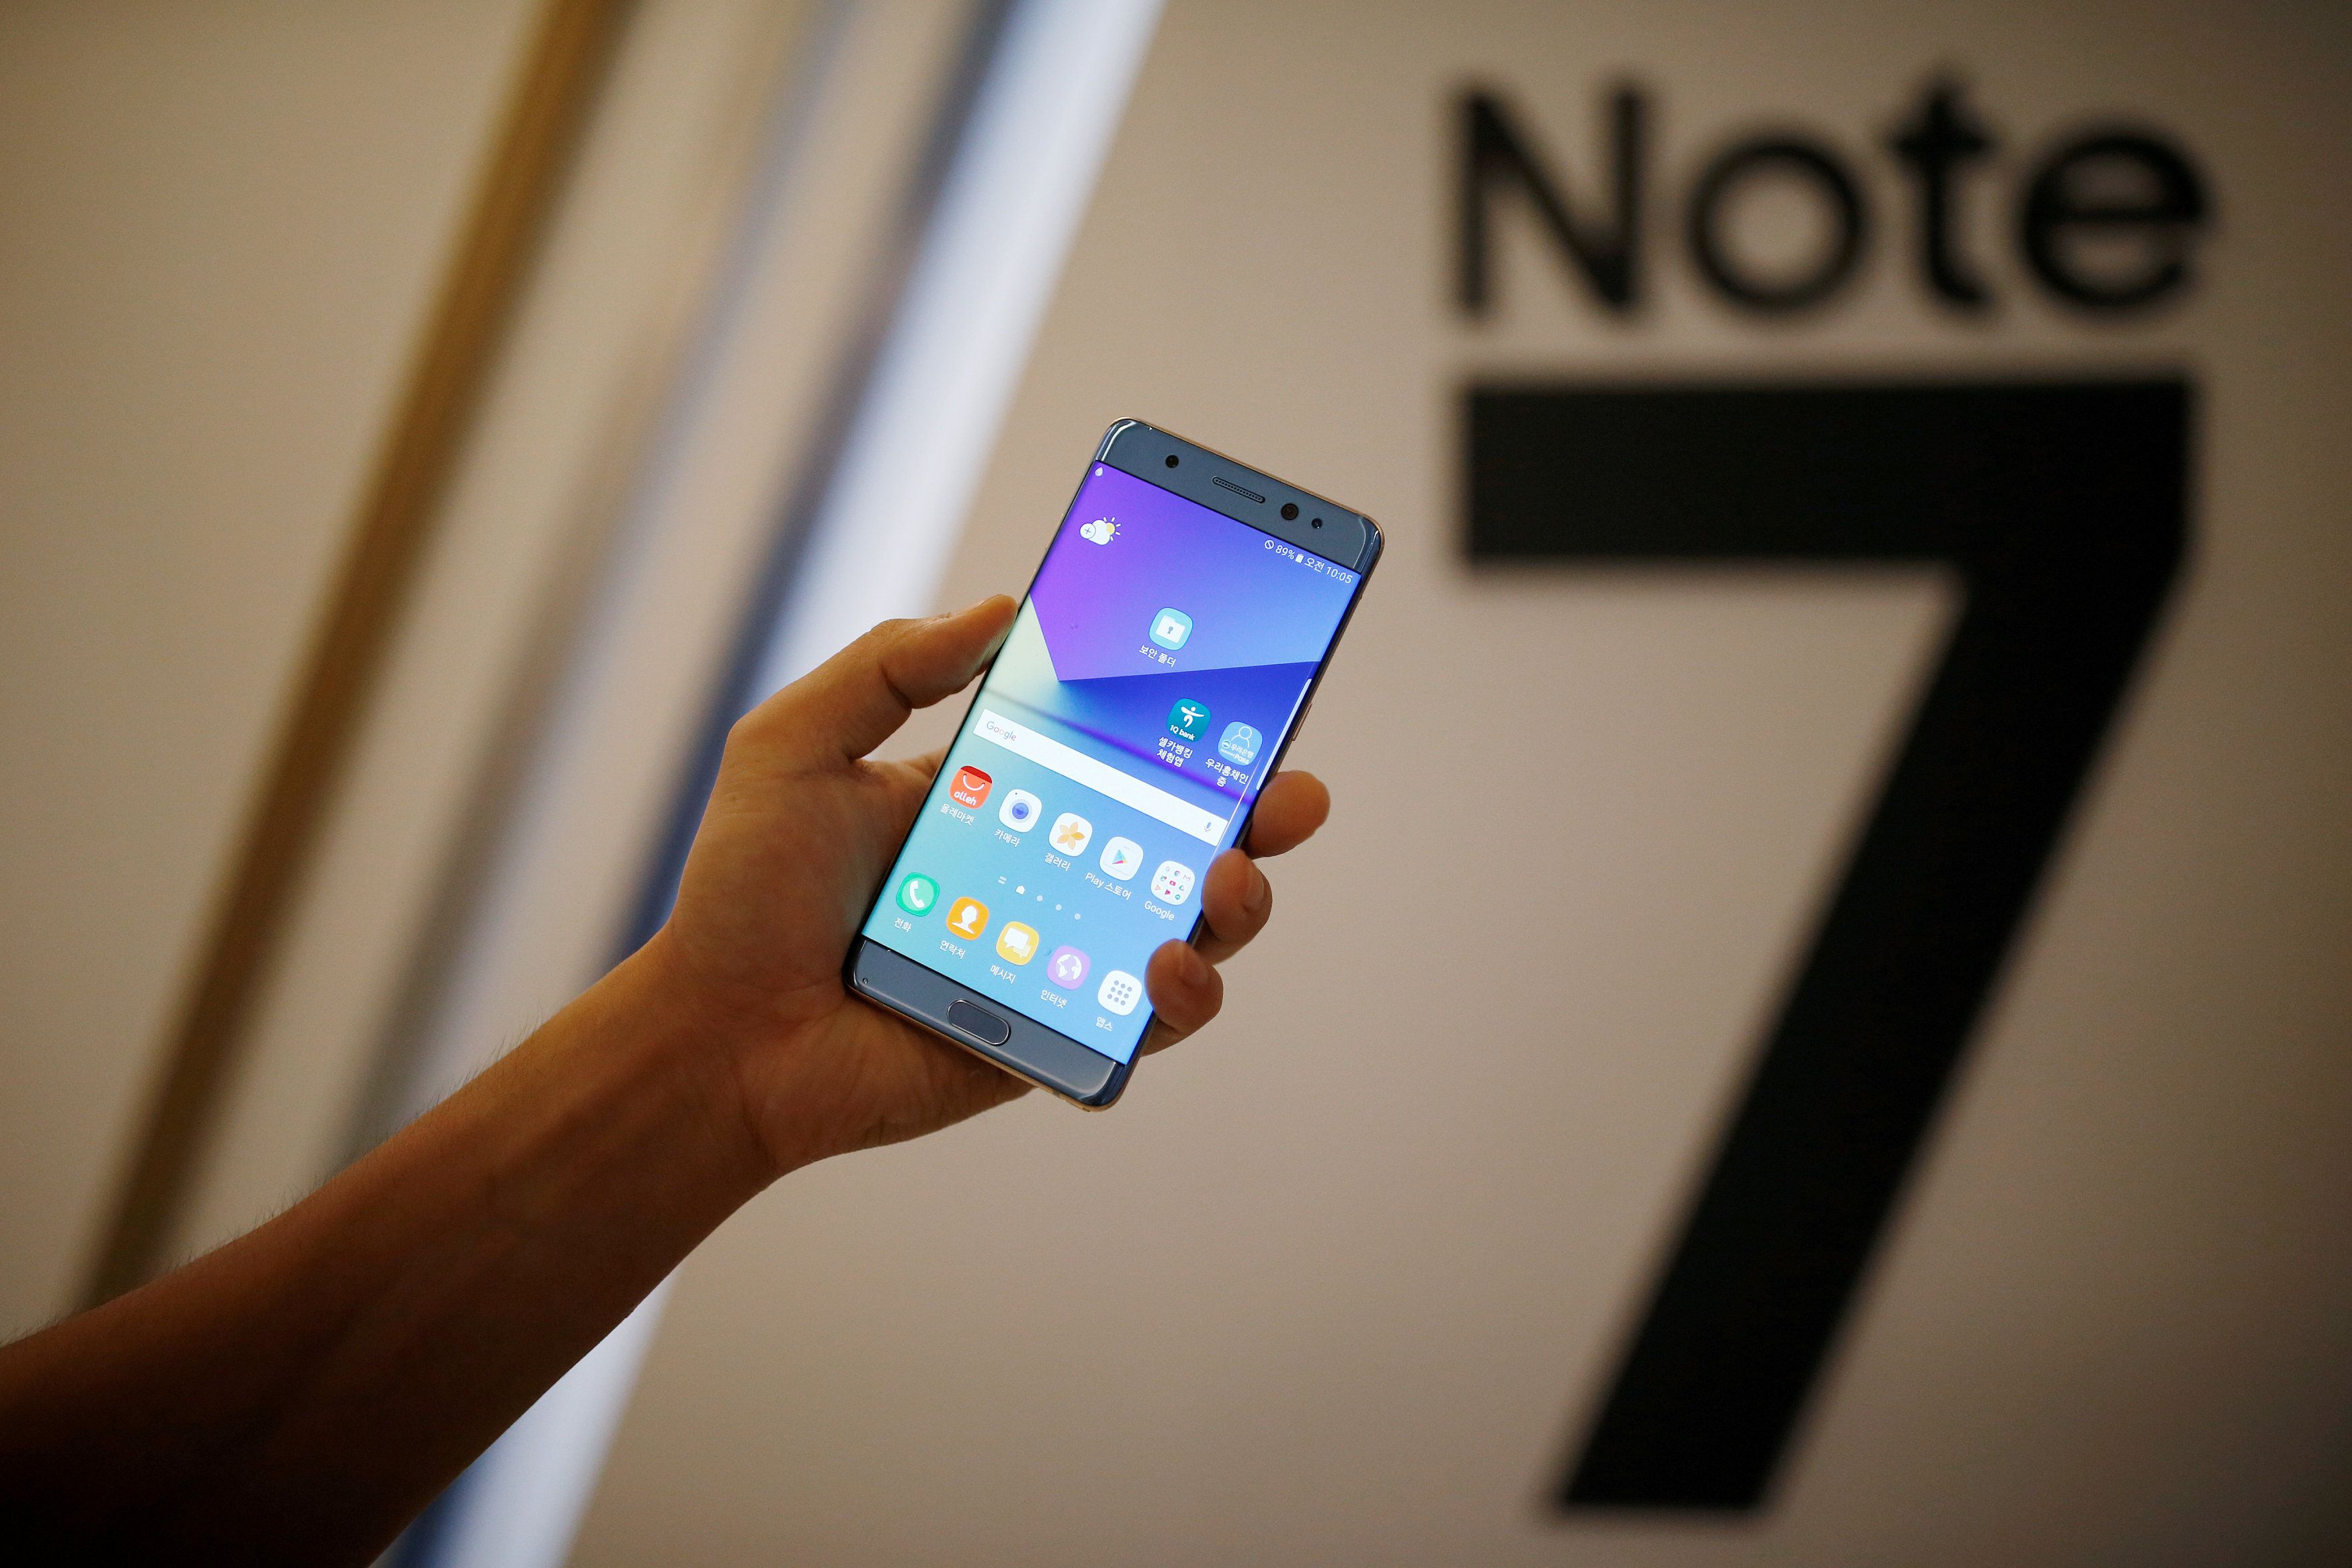 Samsung halts Note 7 production after new fire scare: source